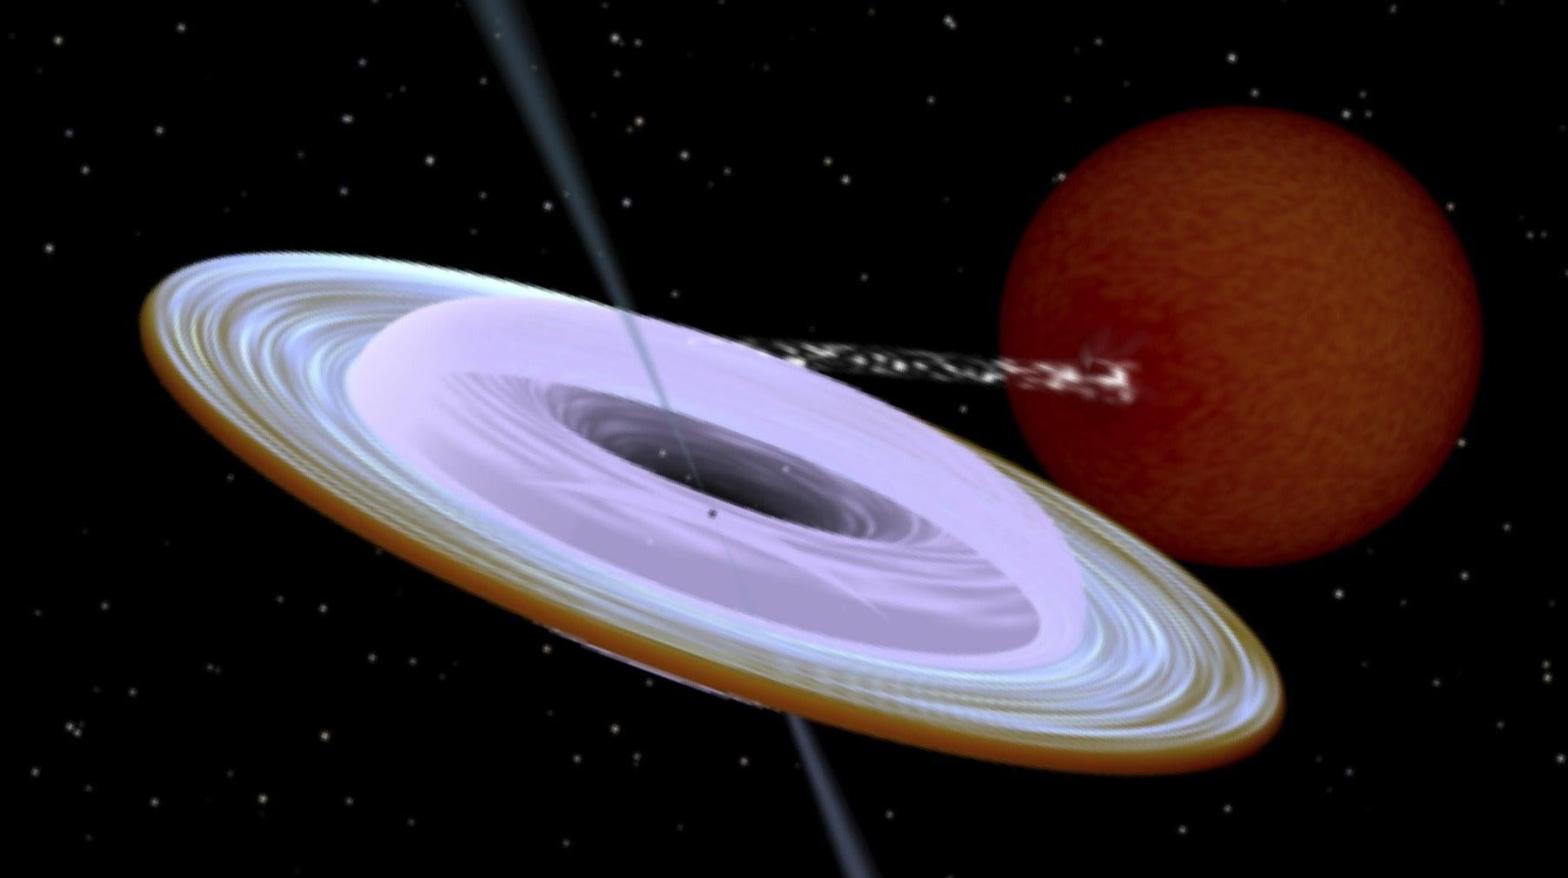 An artist's impression of the binary system, with the angled black hole projecting jets from within the accretion disk of material surrounding it. (Illustration: Rob Hynes)